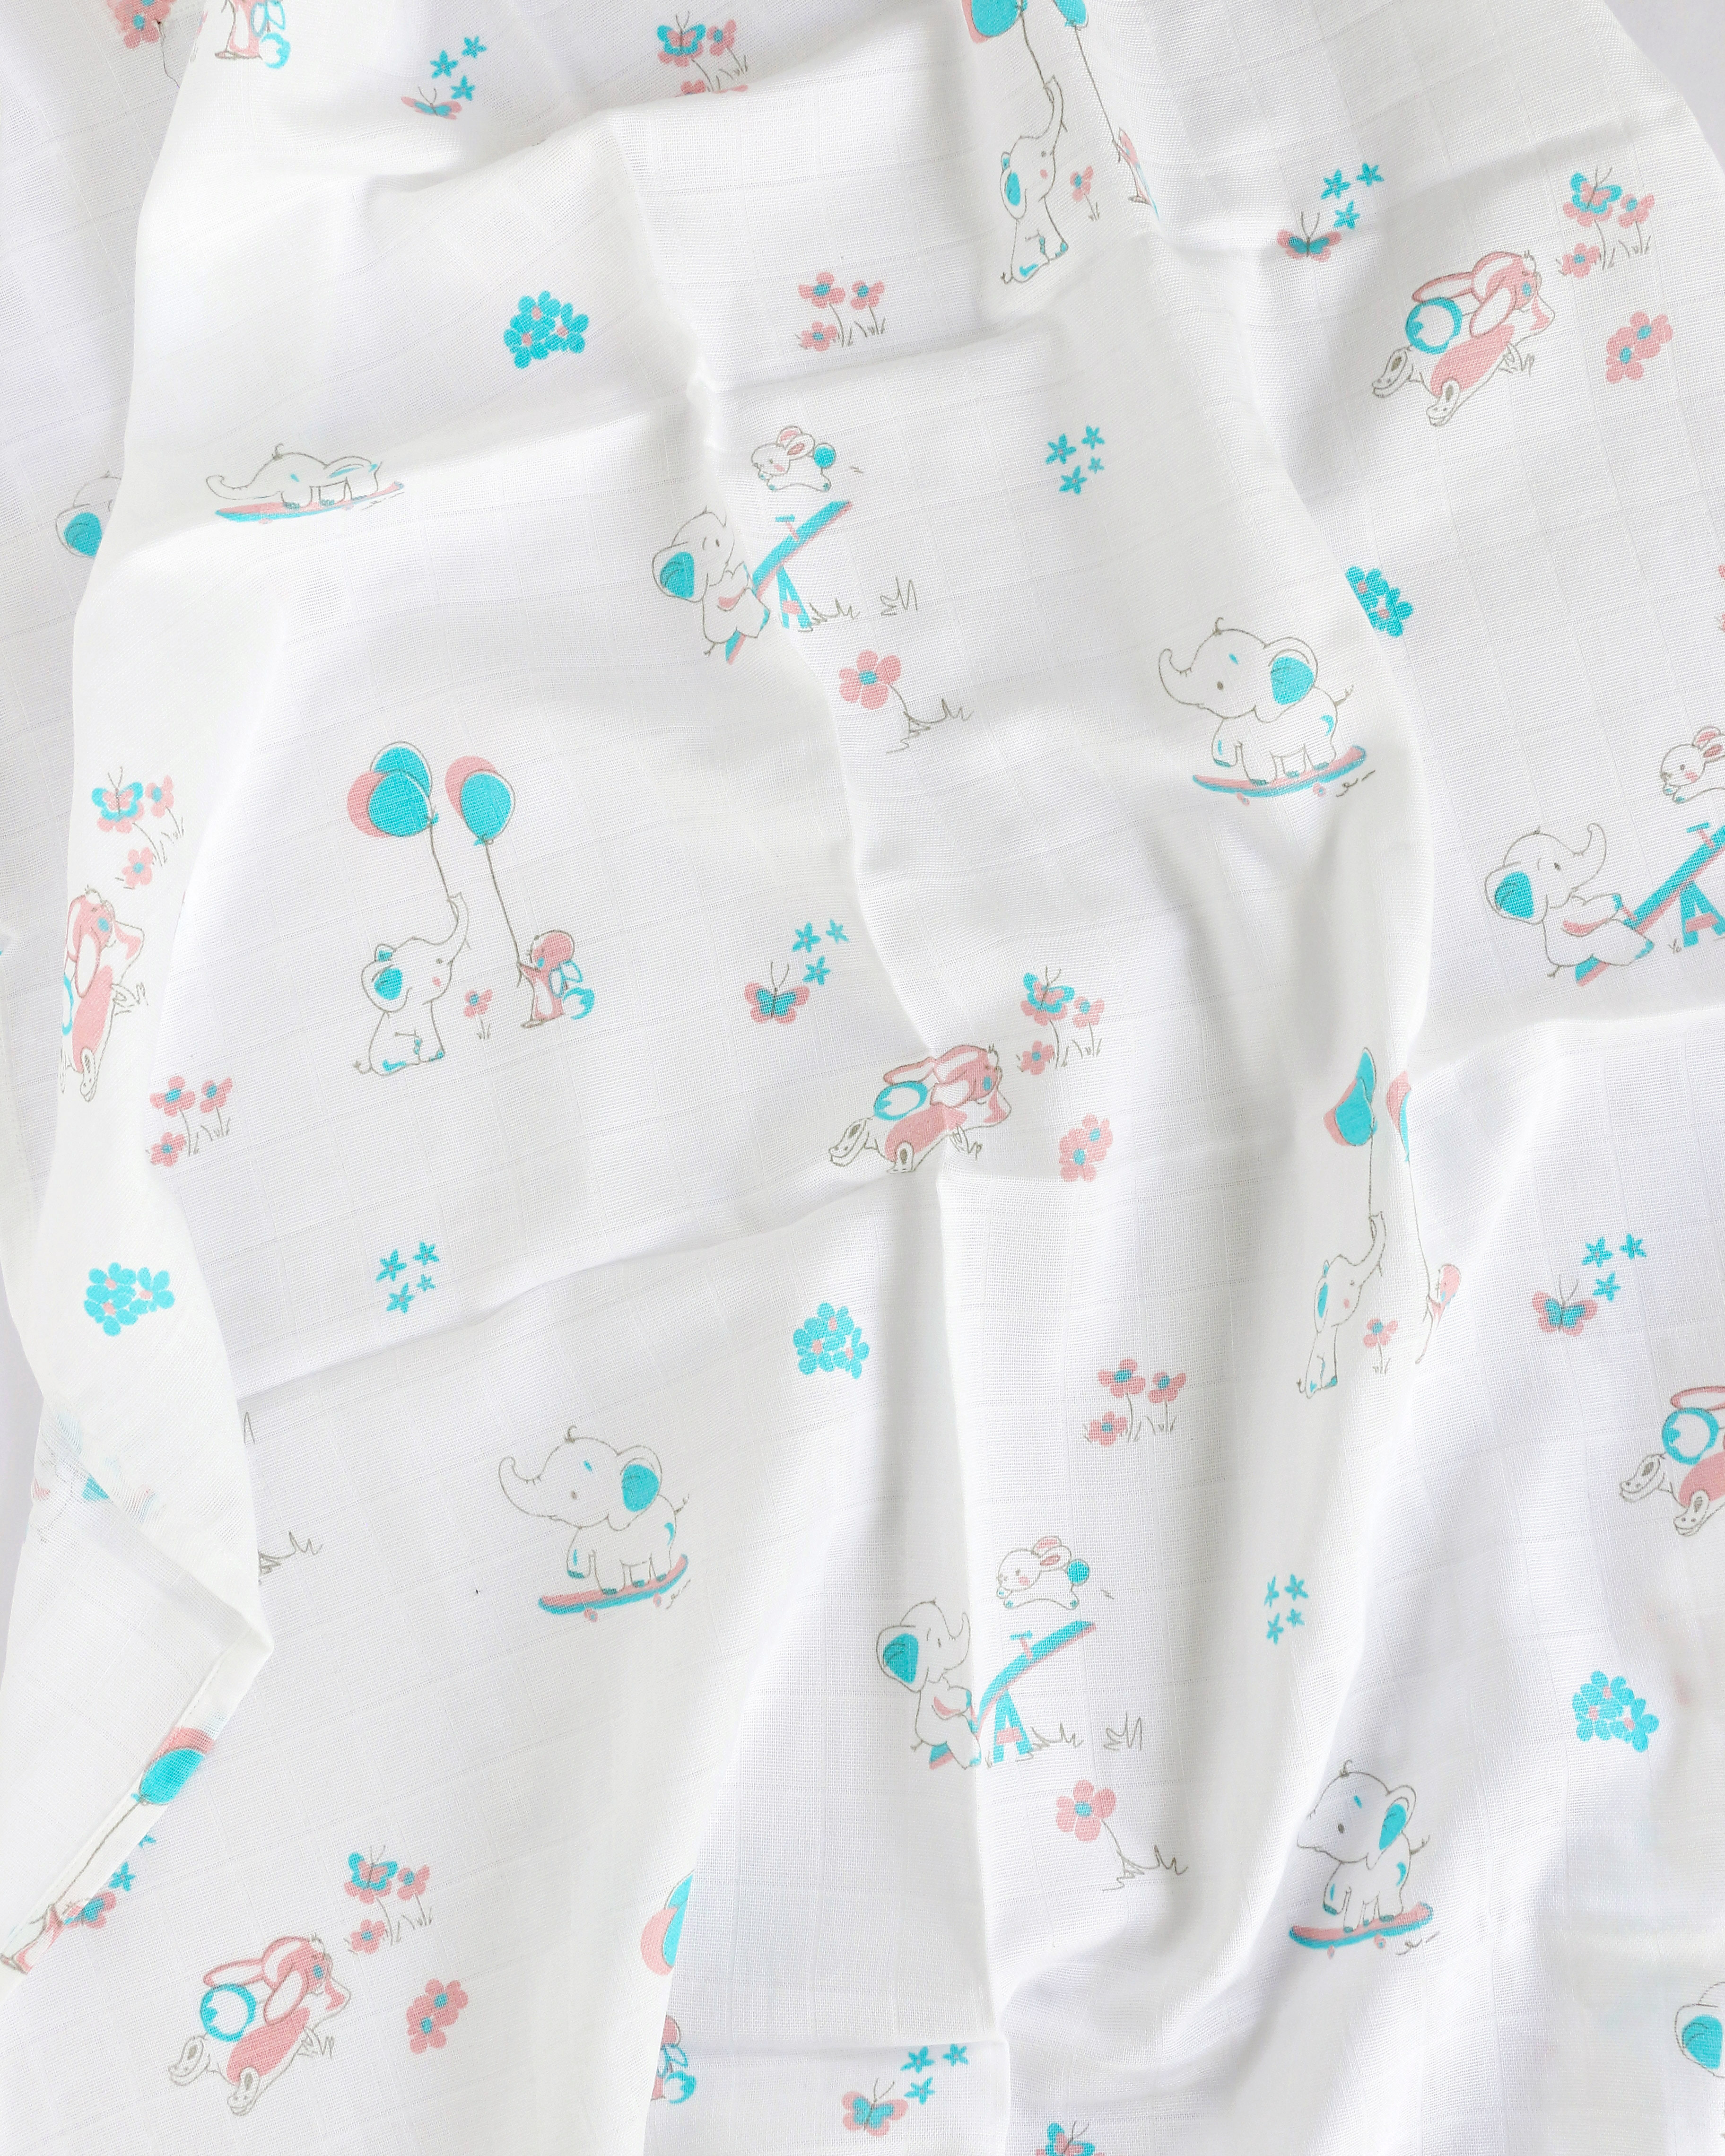 Meet Baggy and Hopps - Organic Cotton ( double layer )Baby Muslin Swaddle/ Blanket - 110 X 110 cms